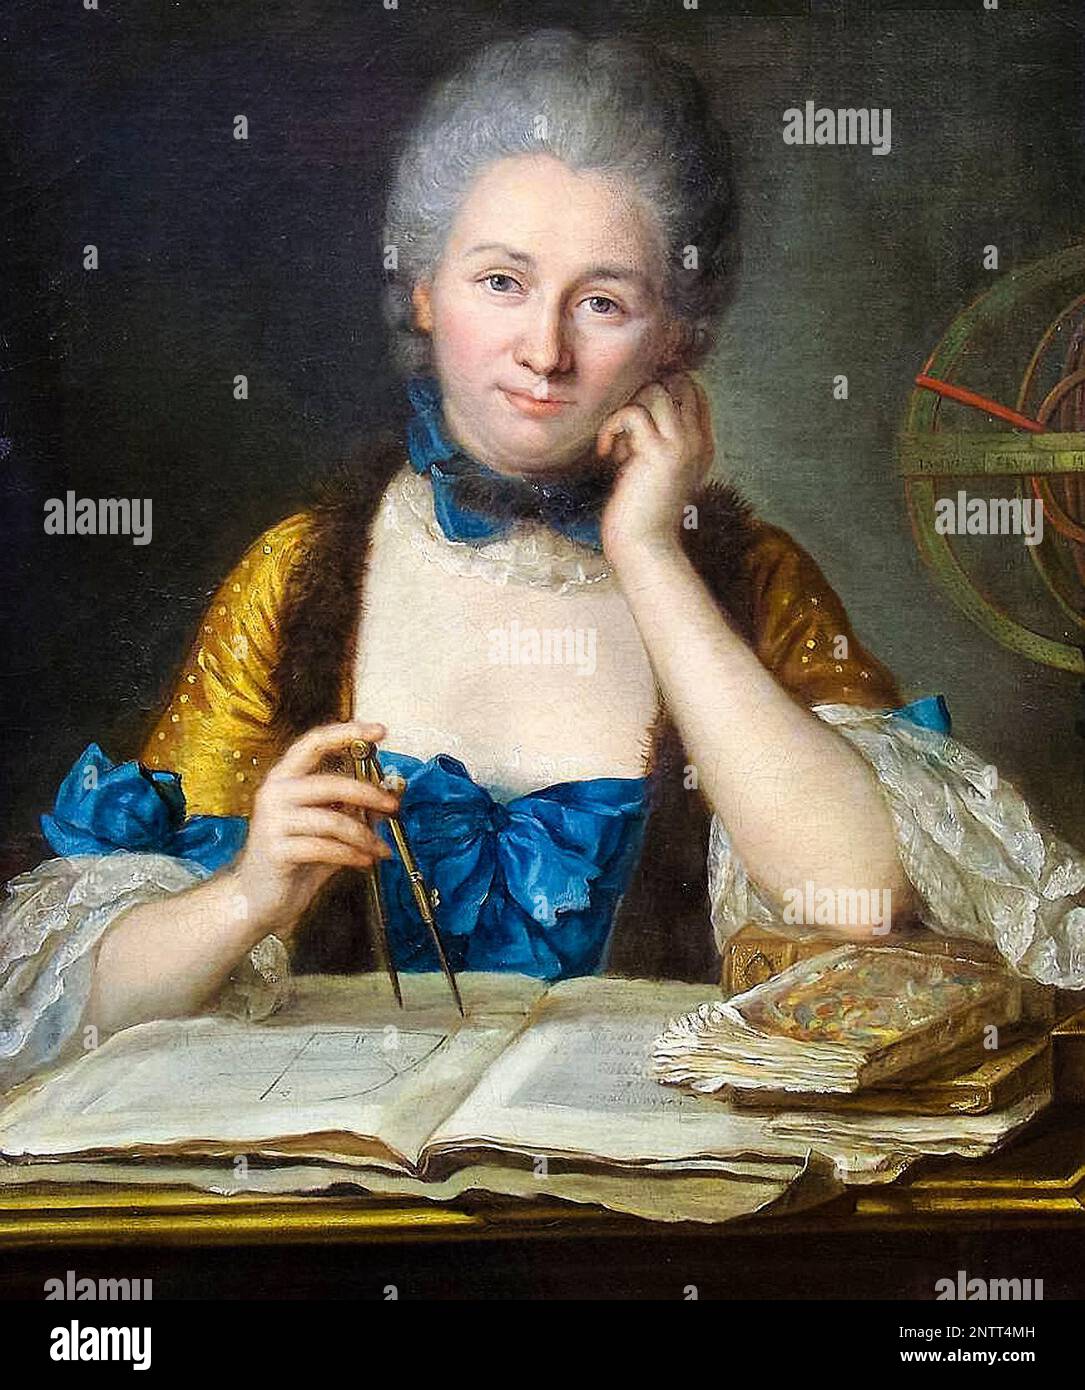 Émilie du Châtelet (1706-1749), French natural philosopher and mathematician, portrait painting in oil on canvas by Maurice Quentin de La Tour, before 1749 Stock Photo